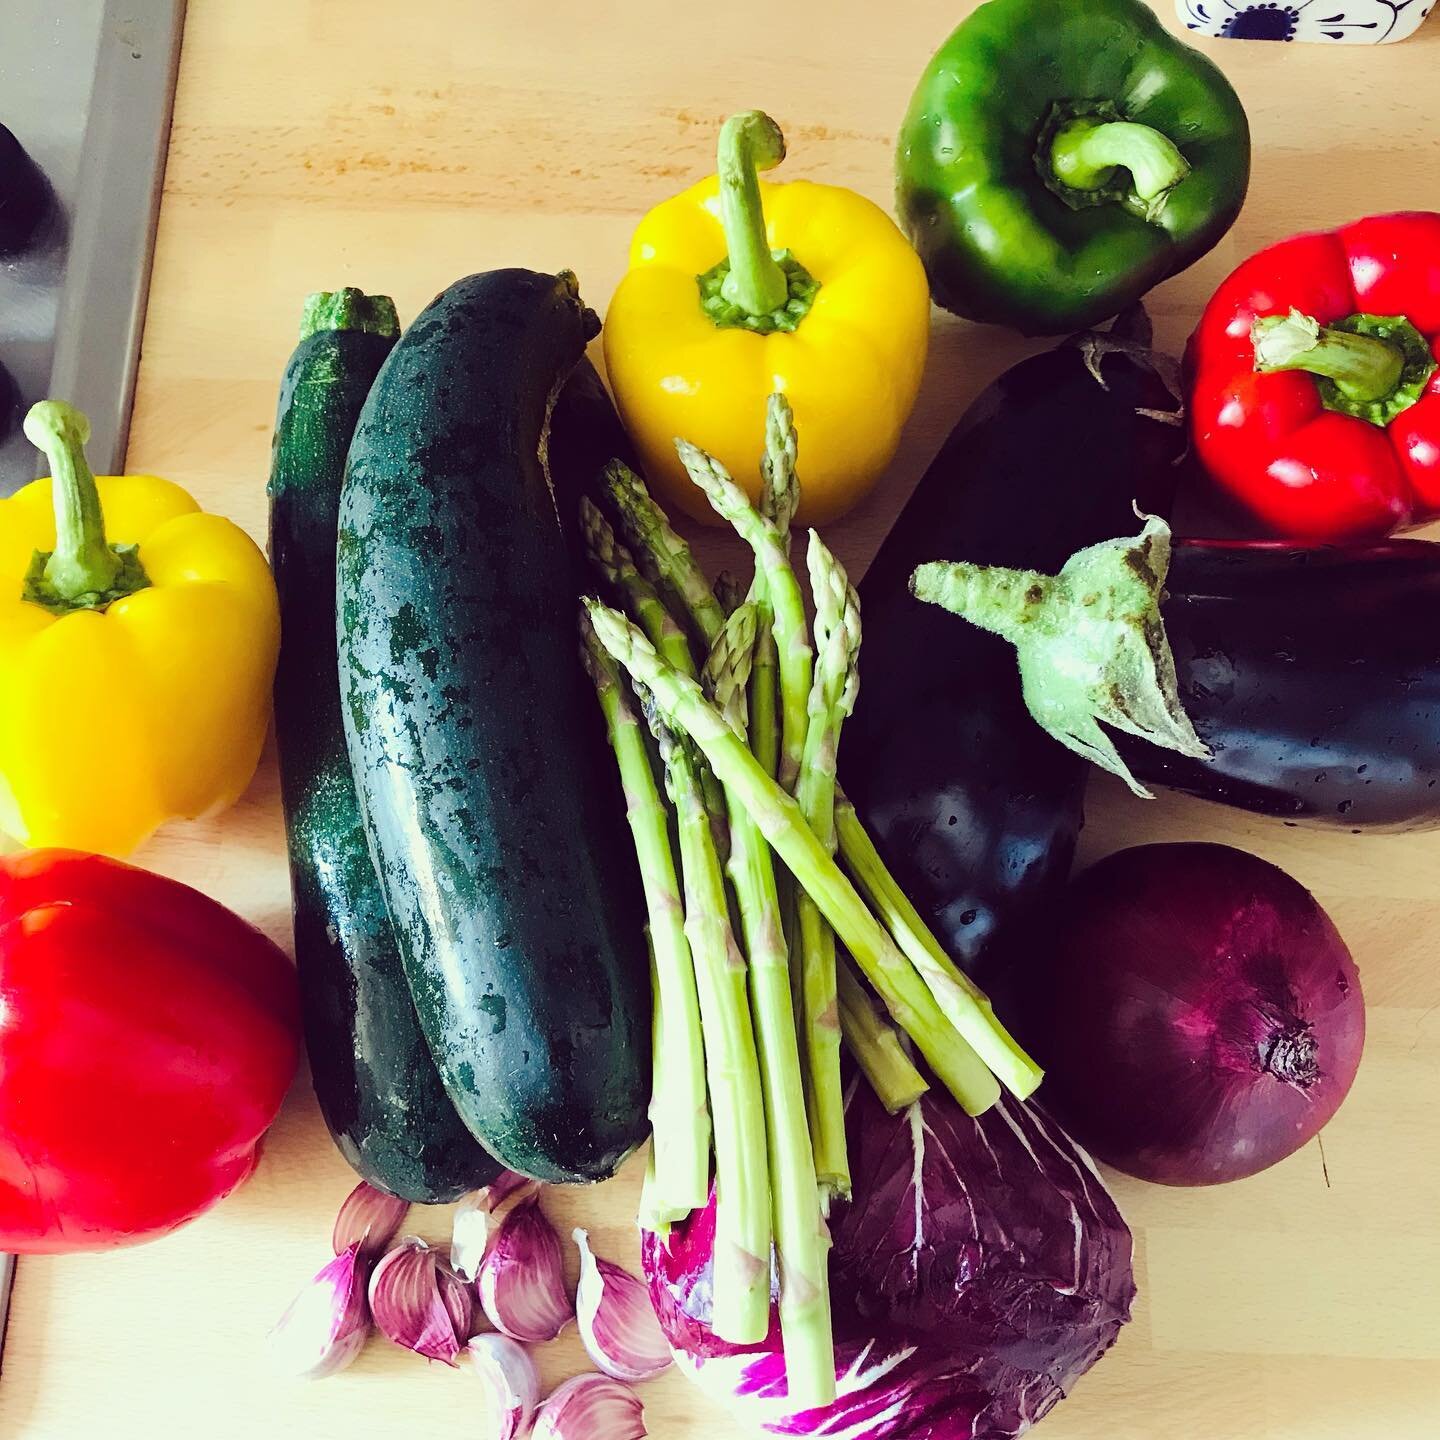 What&rsquo;s cooking? An absolute feast from @goodongreens in #OreVillage #EatARainbow #Summer #shoplocal #lovewhereyoulive